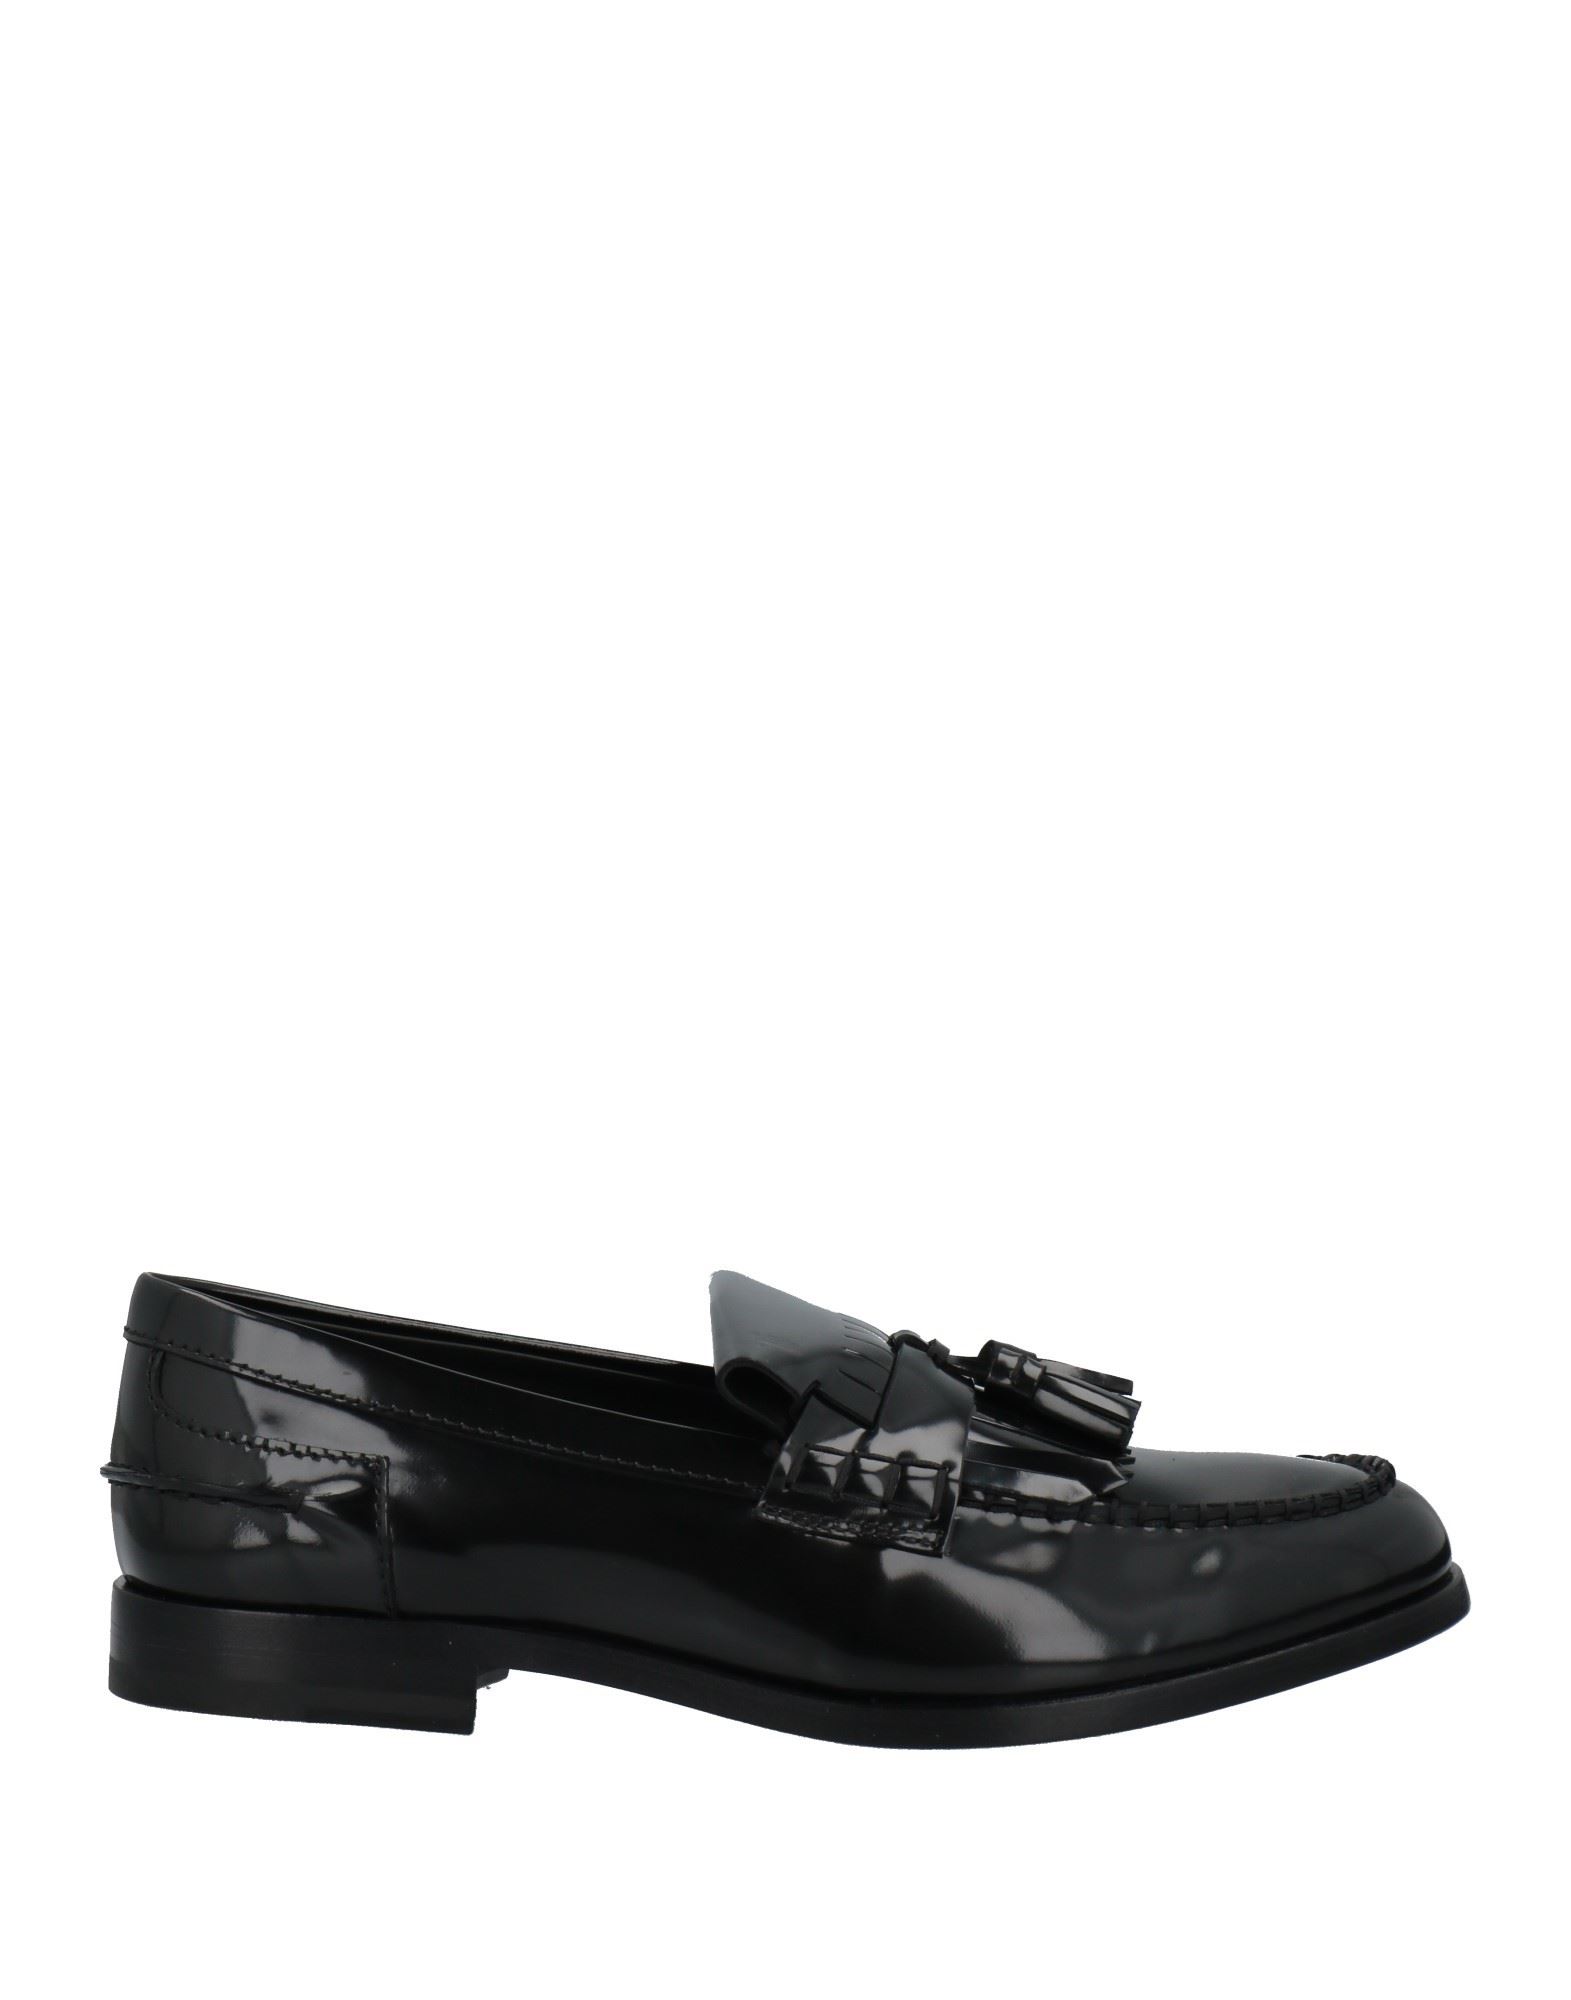 TOD'S HAPPY MOMENTS by ALBER ELBAZ Loafers